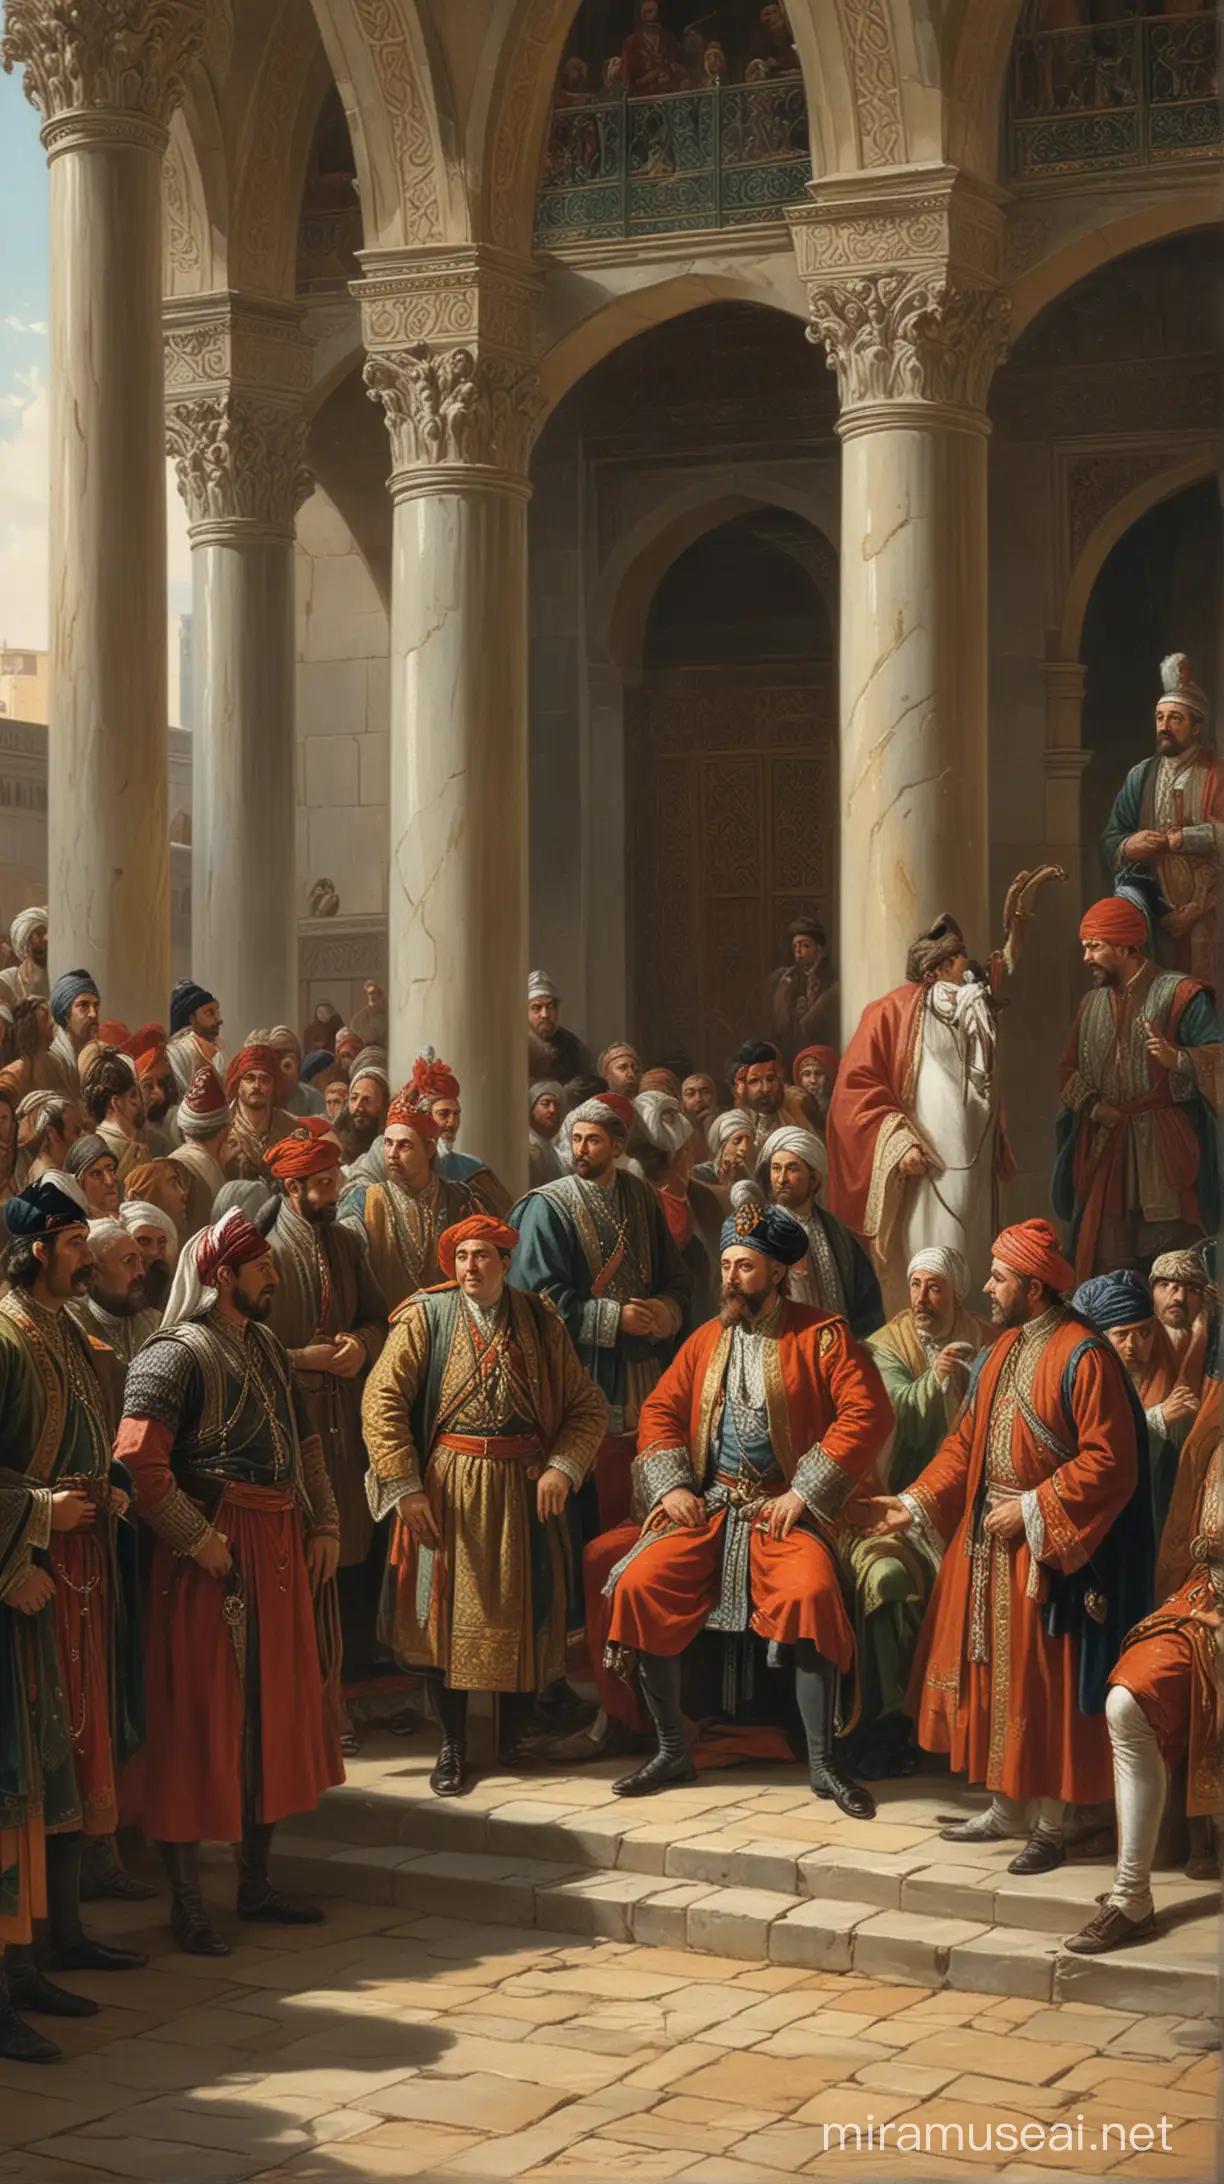 A scene where Sabbatai Sevi is speaking conspicuously at the Ottoman palace. Courtiers are listening to him attentively, some with astonishment, some with concern.
